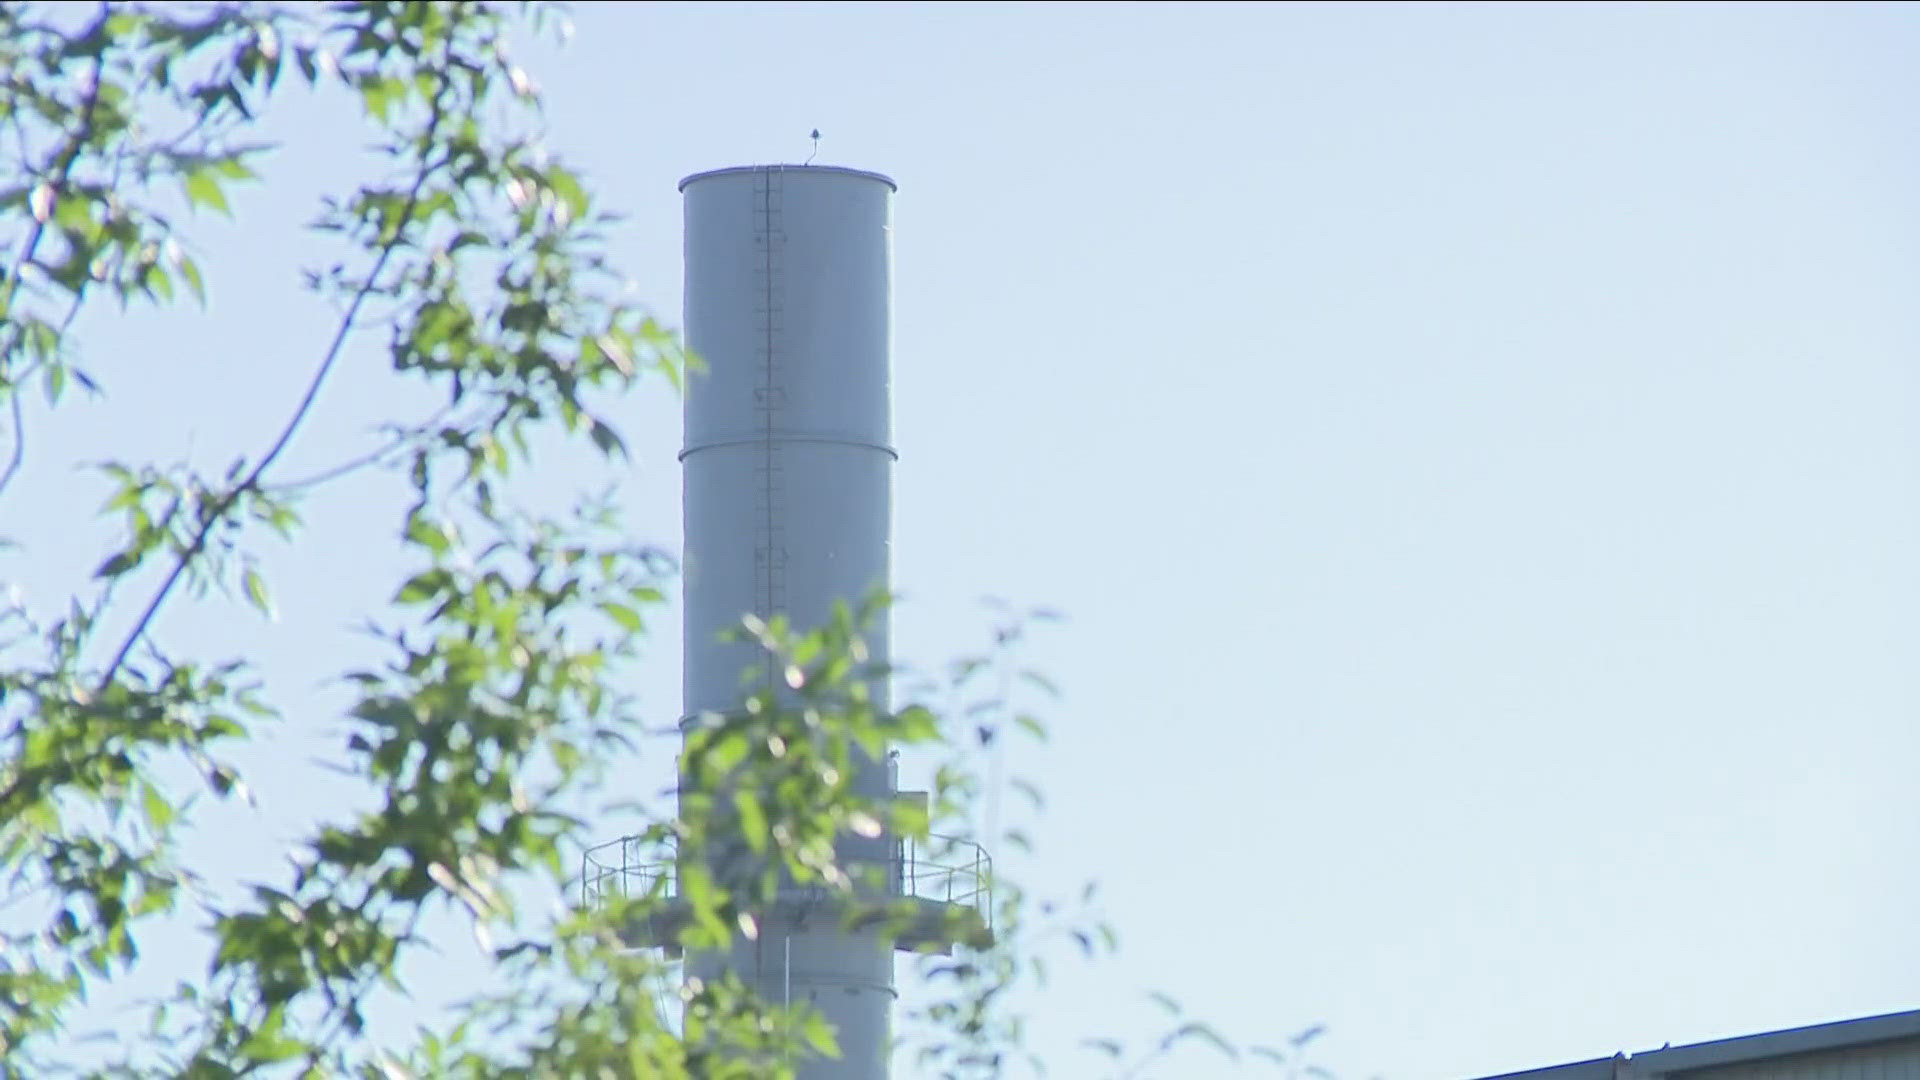 Noise problems continue for neighbors of the Digihost plant in North Tonawanda